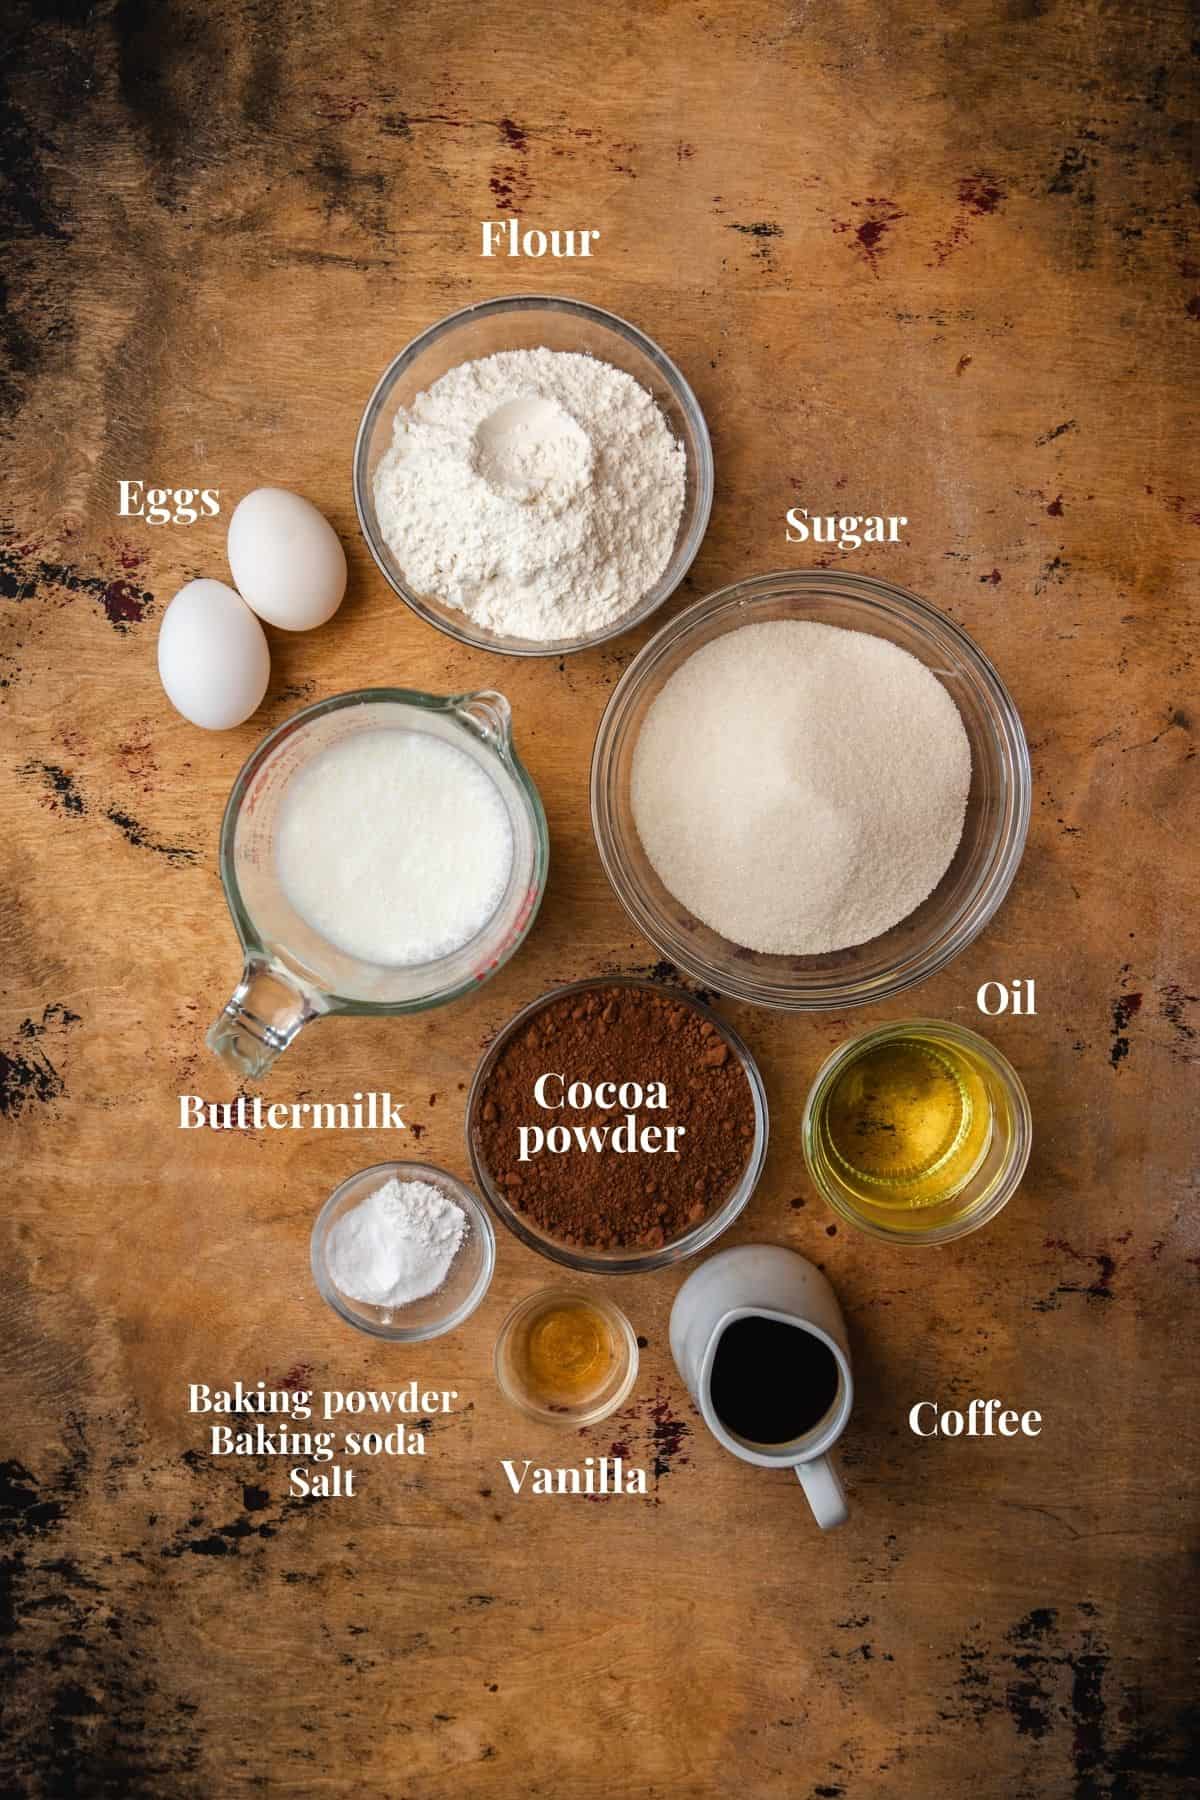 Ingredients to make chocolate cake on a wood surface.